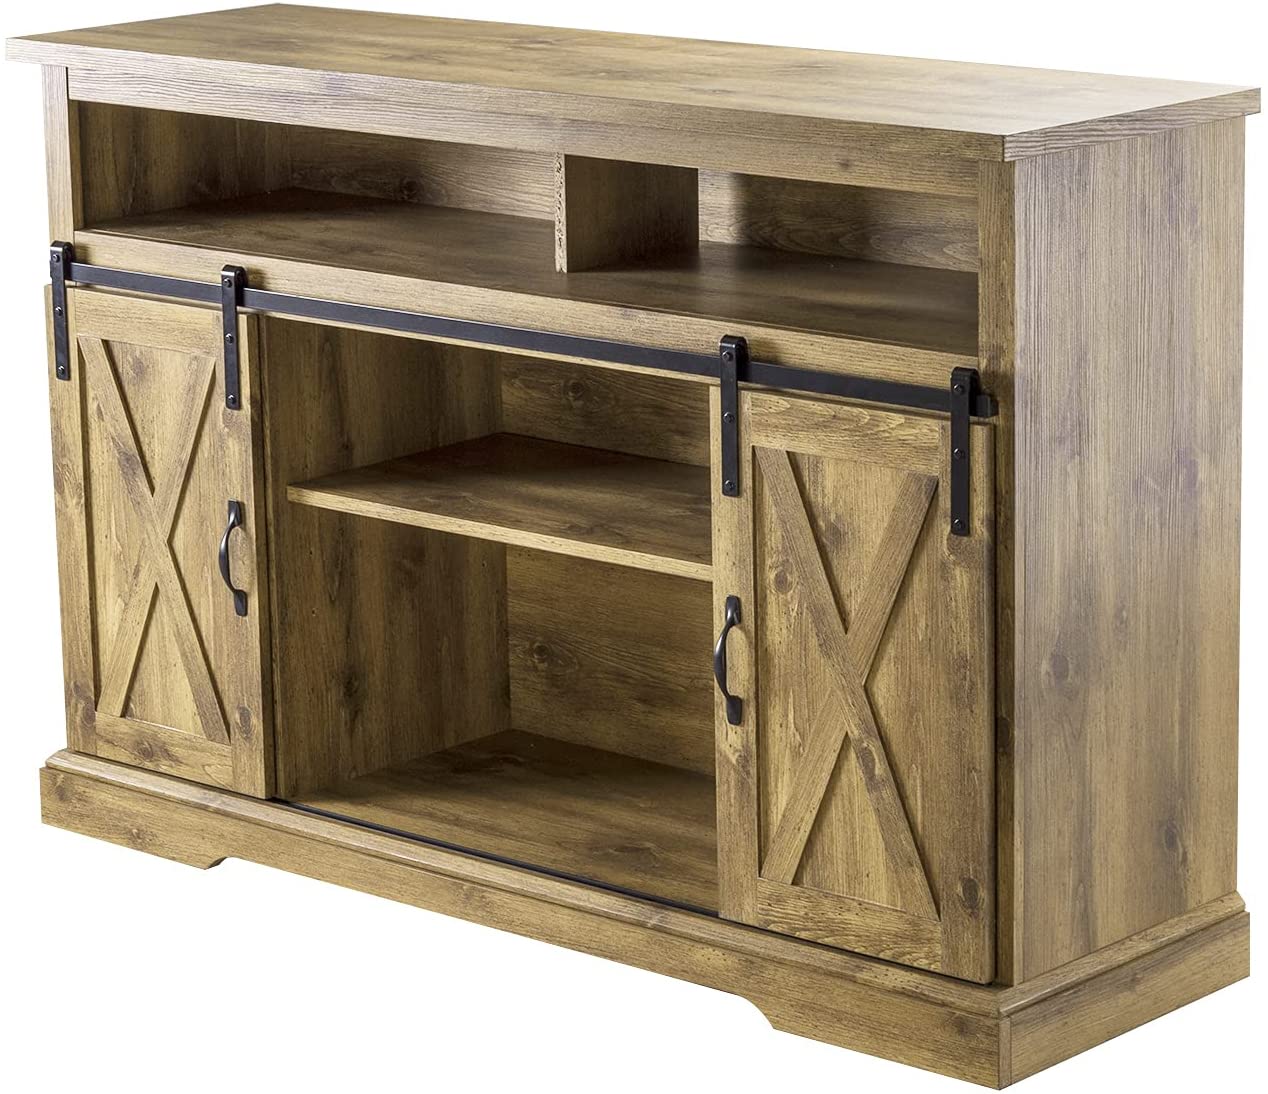 Allewie TV Stand Table with Sliding Barn Doors Entertainment Center with Storage Cabinet Farmhouse Wood Table for Living Room